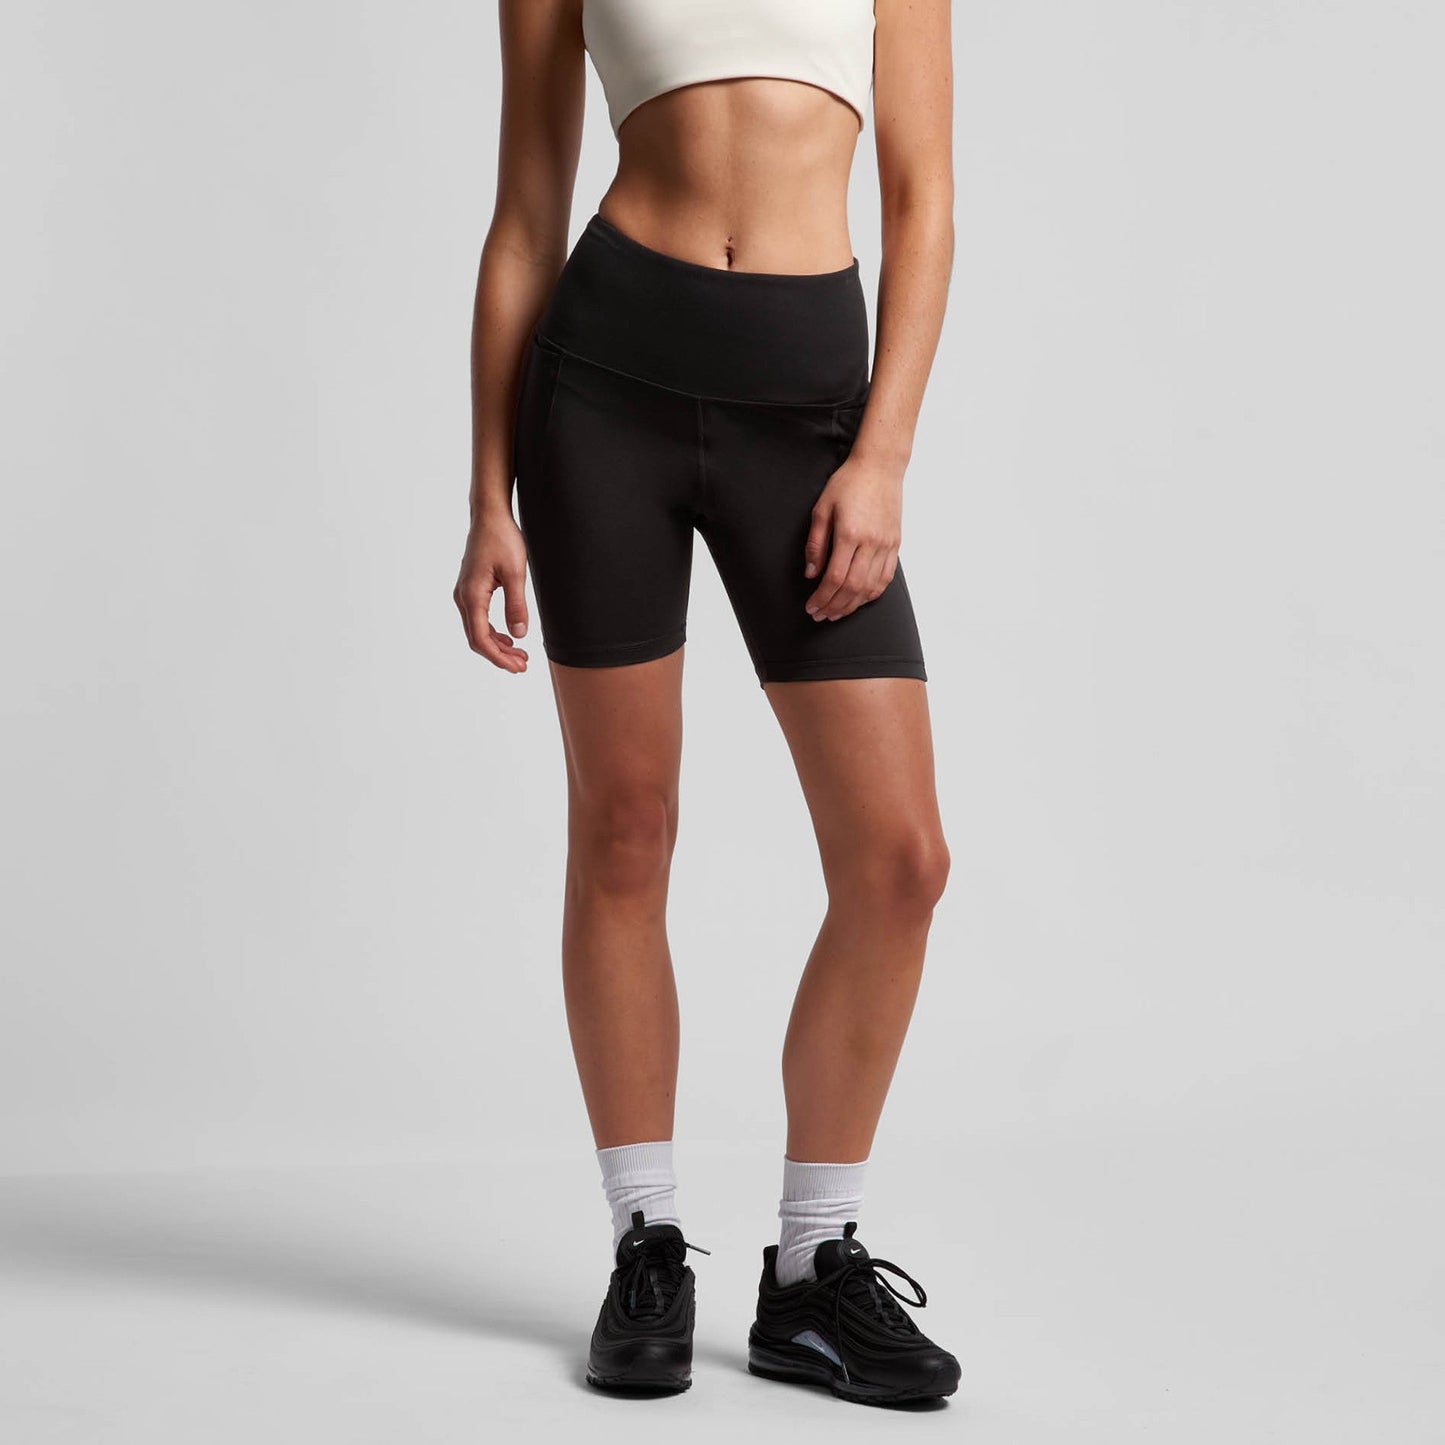 Women's Active Bike Shorts | COLD COFFEE LABEL